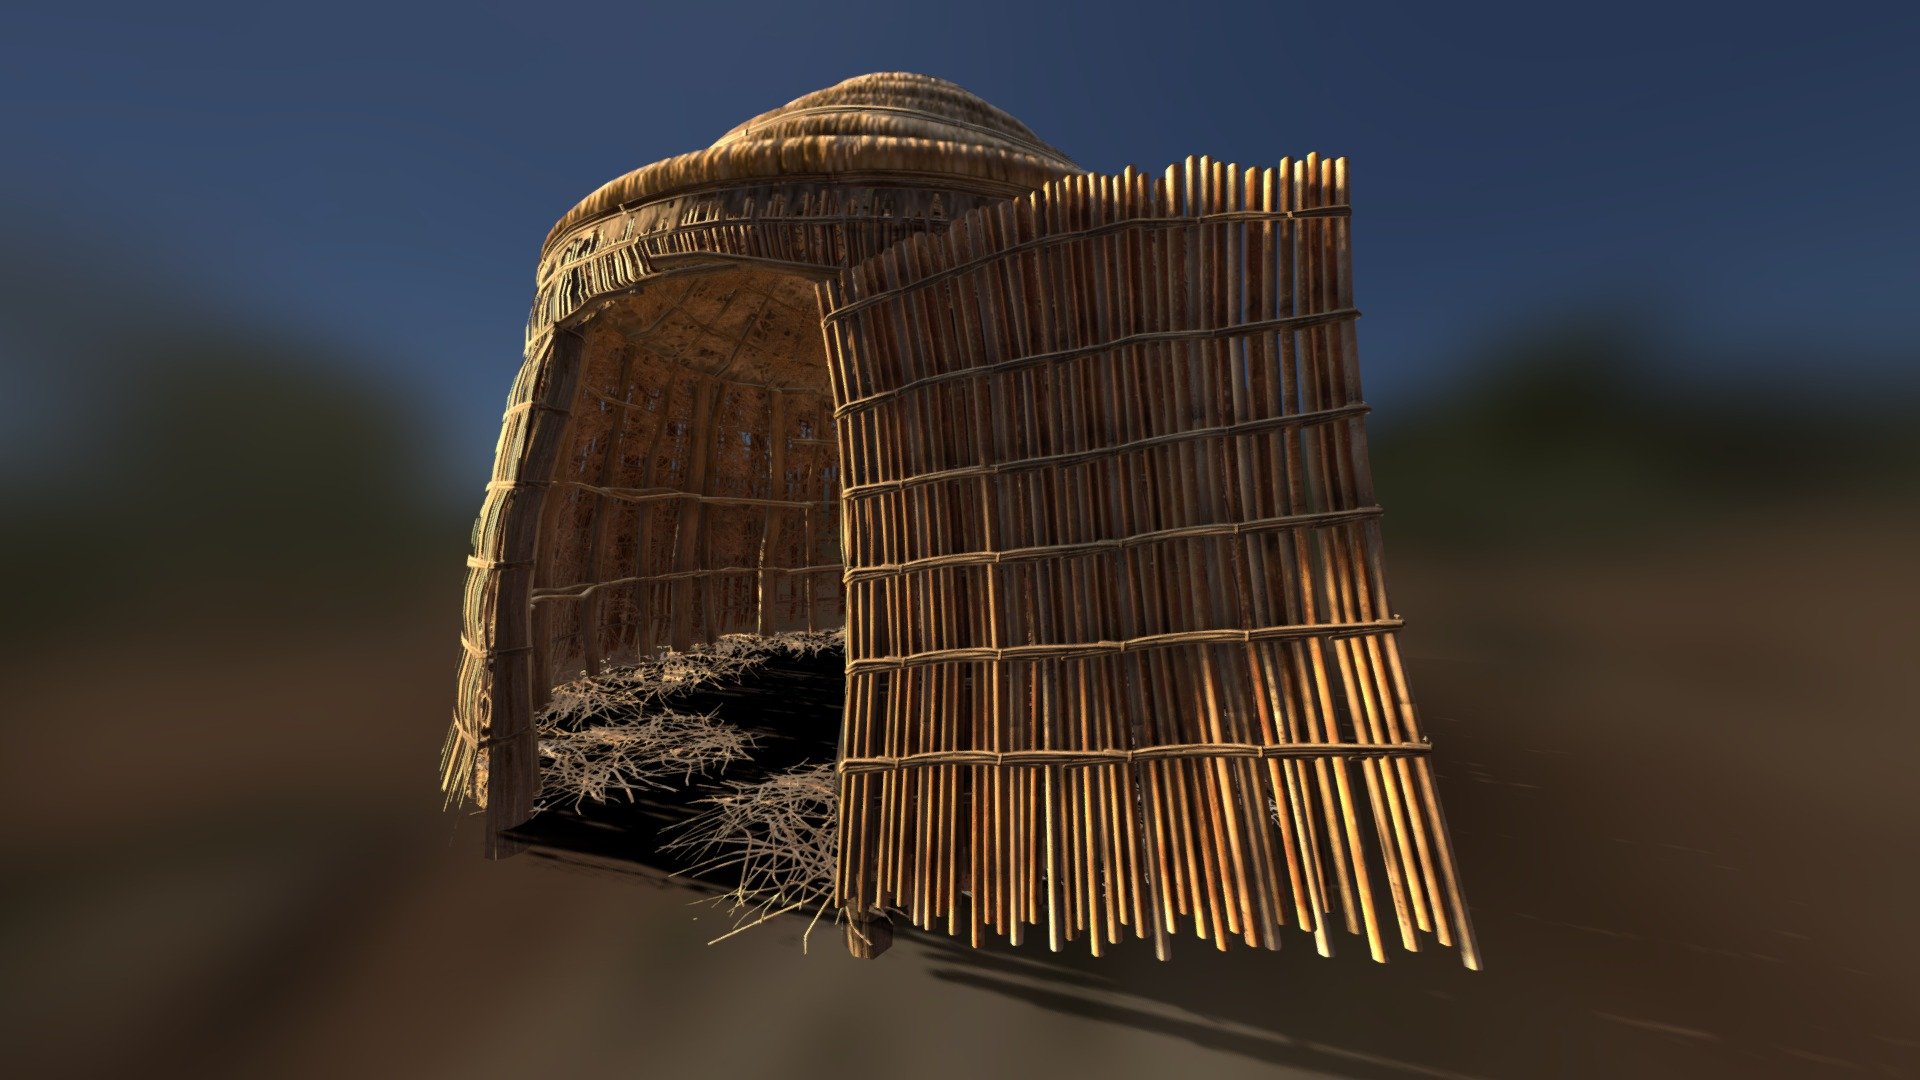 ⚠️looks bad in sketchfab if alpha texture is not loaded completely or looking from far inside sketchfab⚠️
Lapa hut, little bit old school, with every material being reusable/modular/seamless.
Every texture made in substance designer 3d model